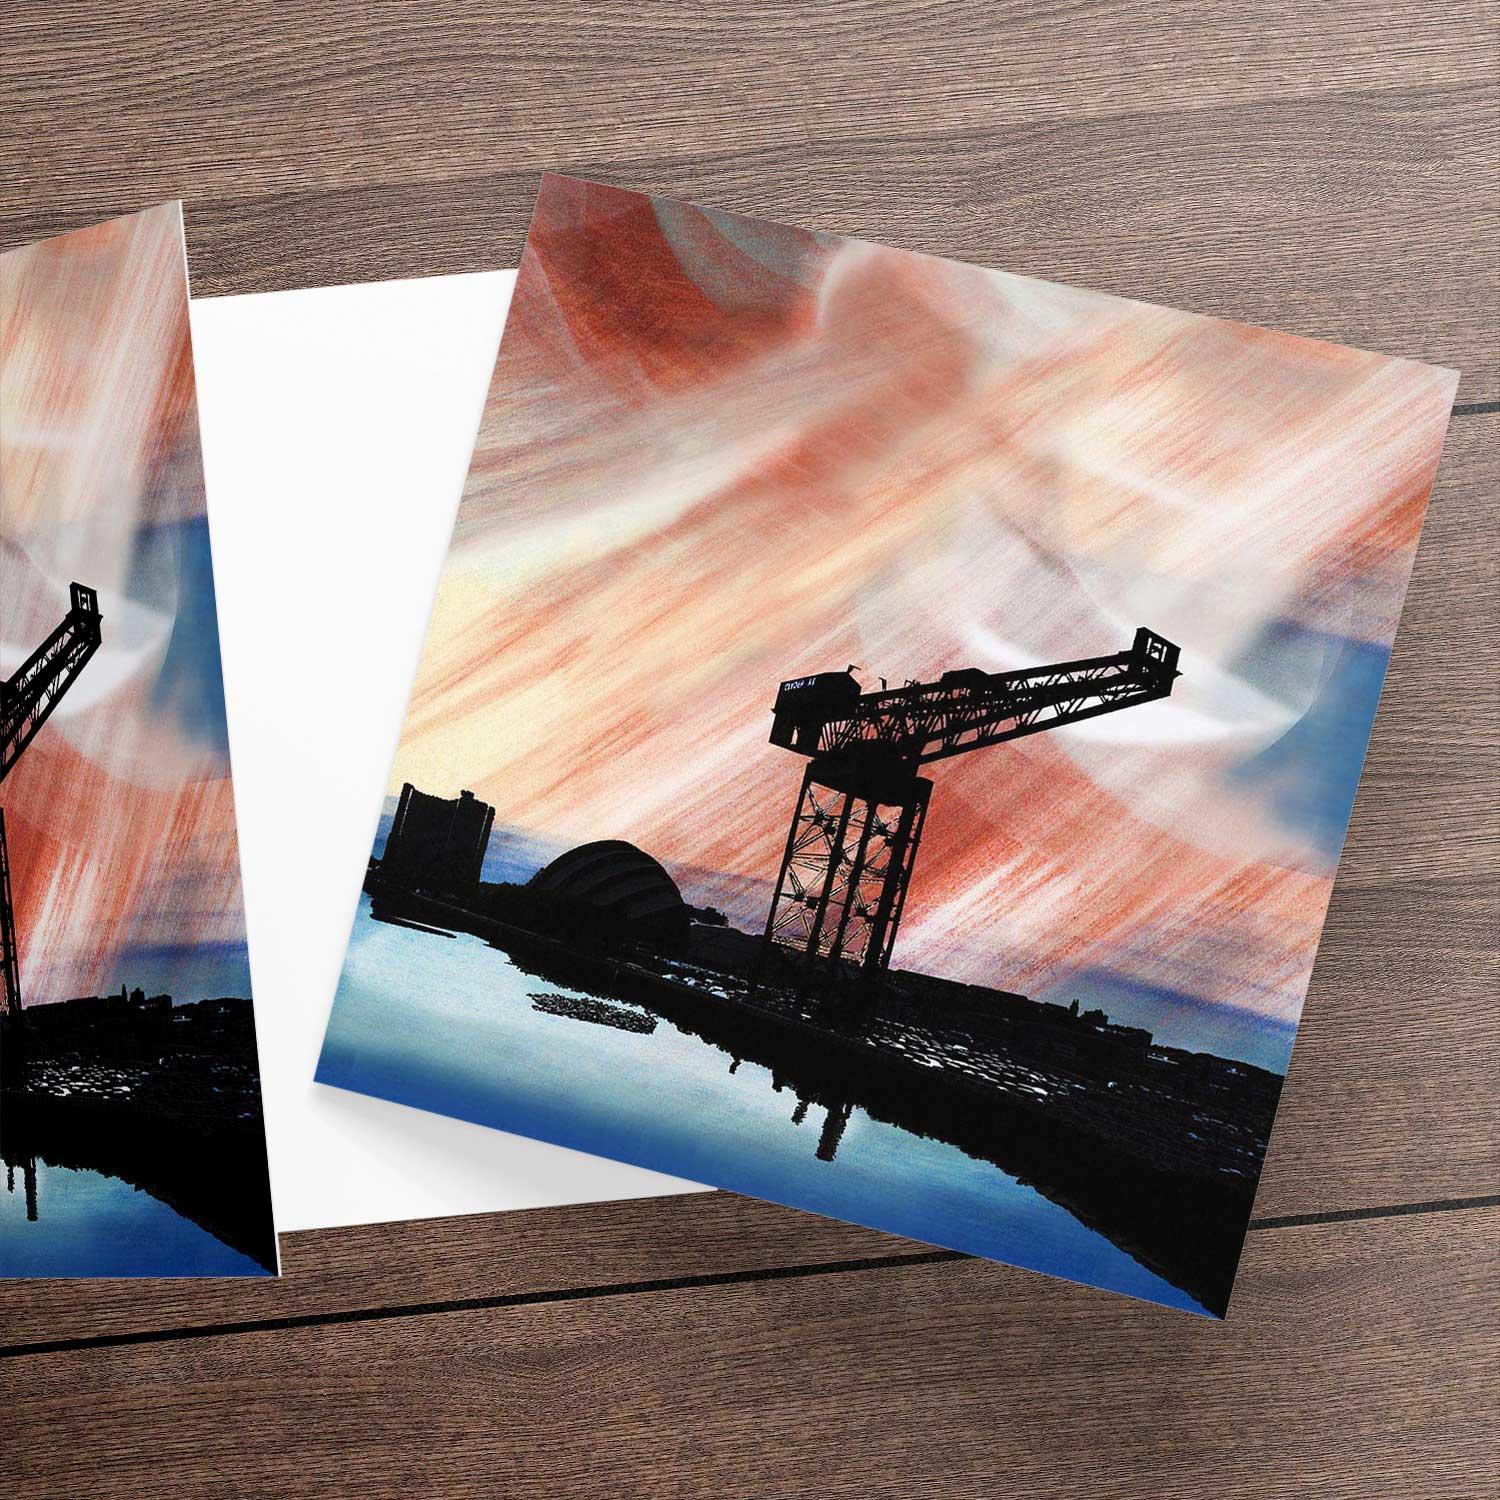 Finnieston Crane Greeting Card from an original painting by artist Esther Cohen